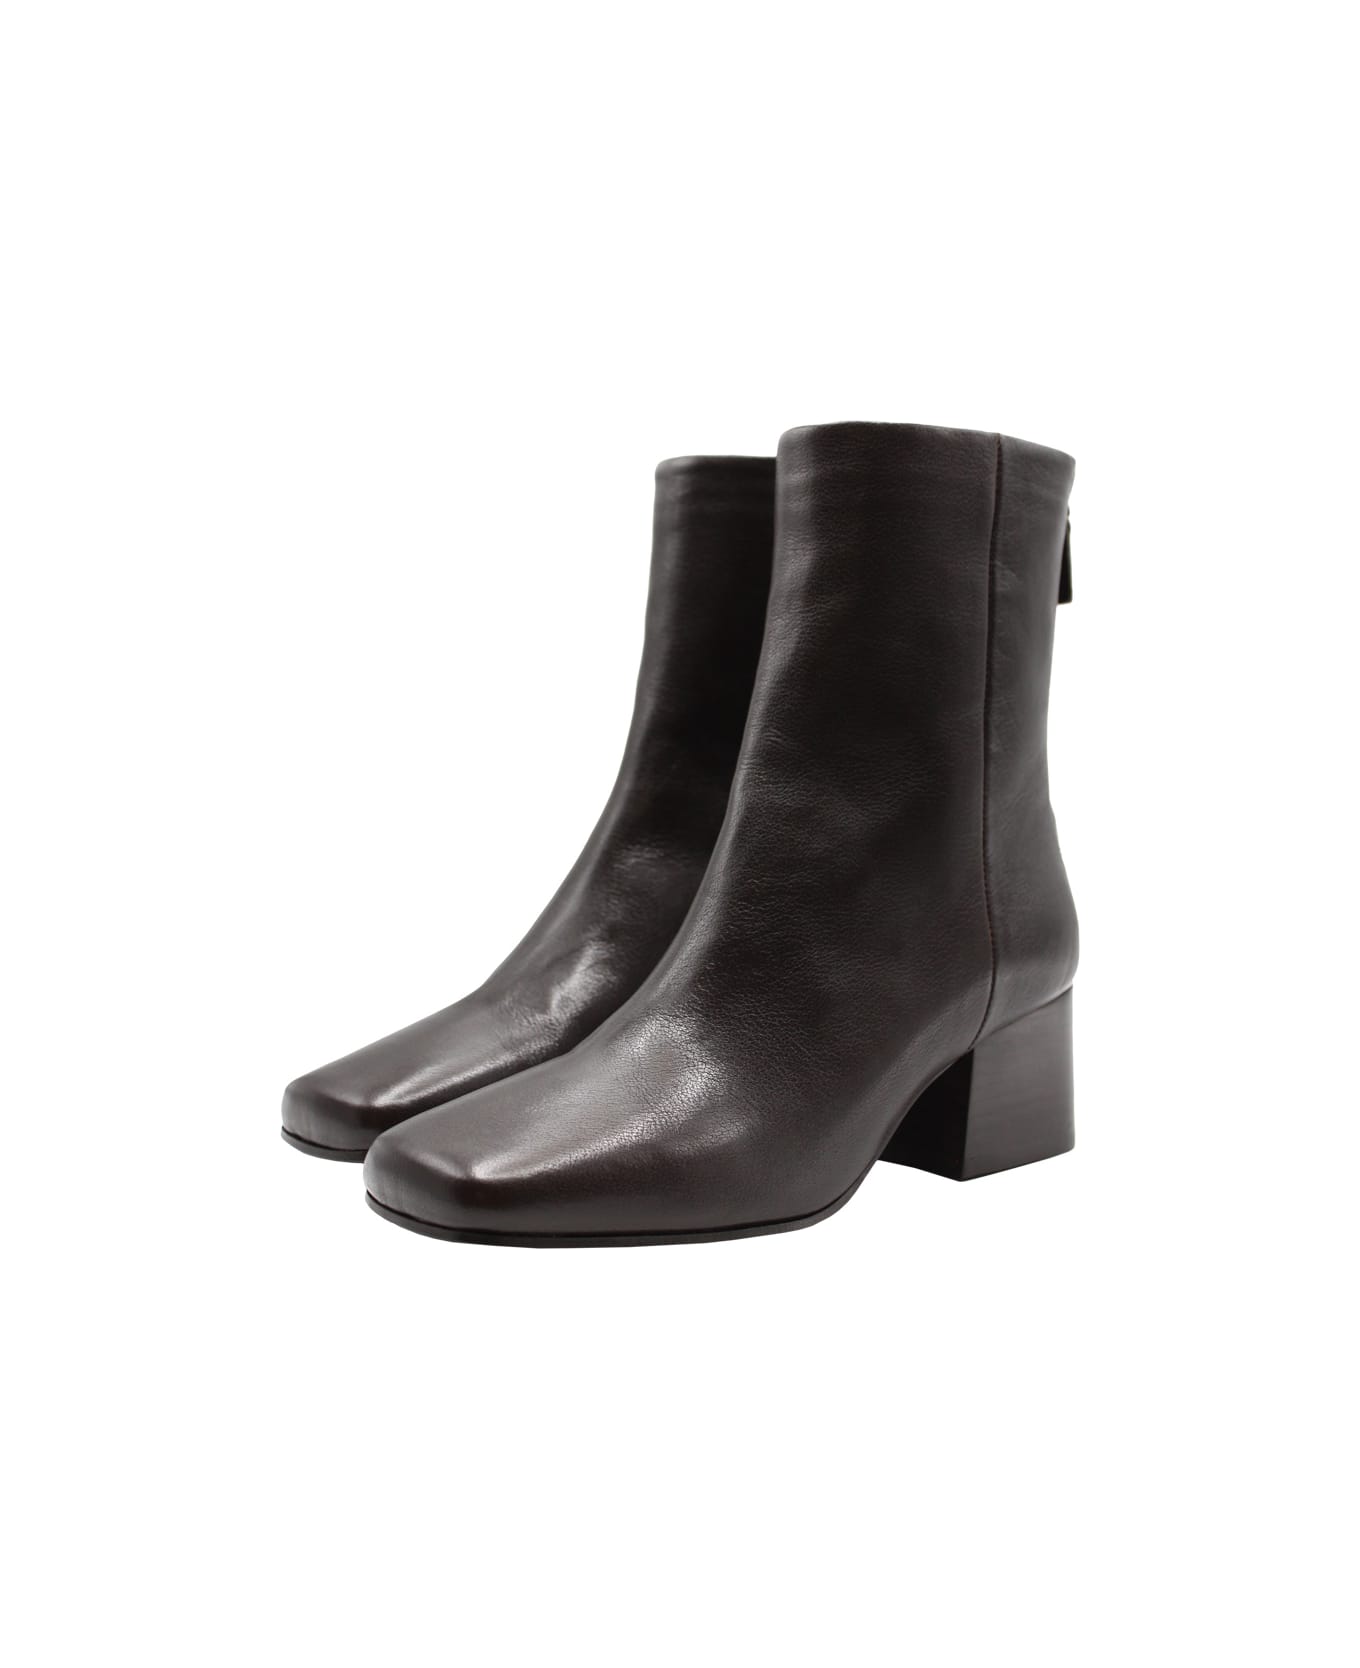 Lemaire Soft Boots 55 - Dark Chocolate